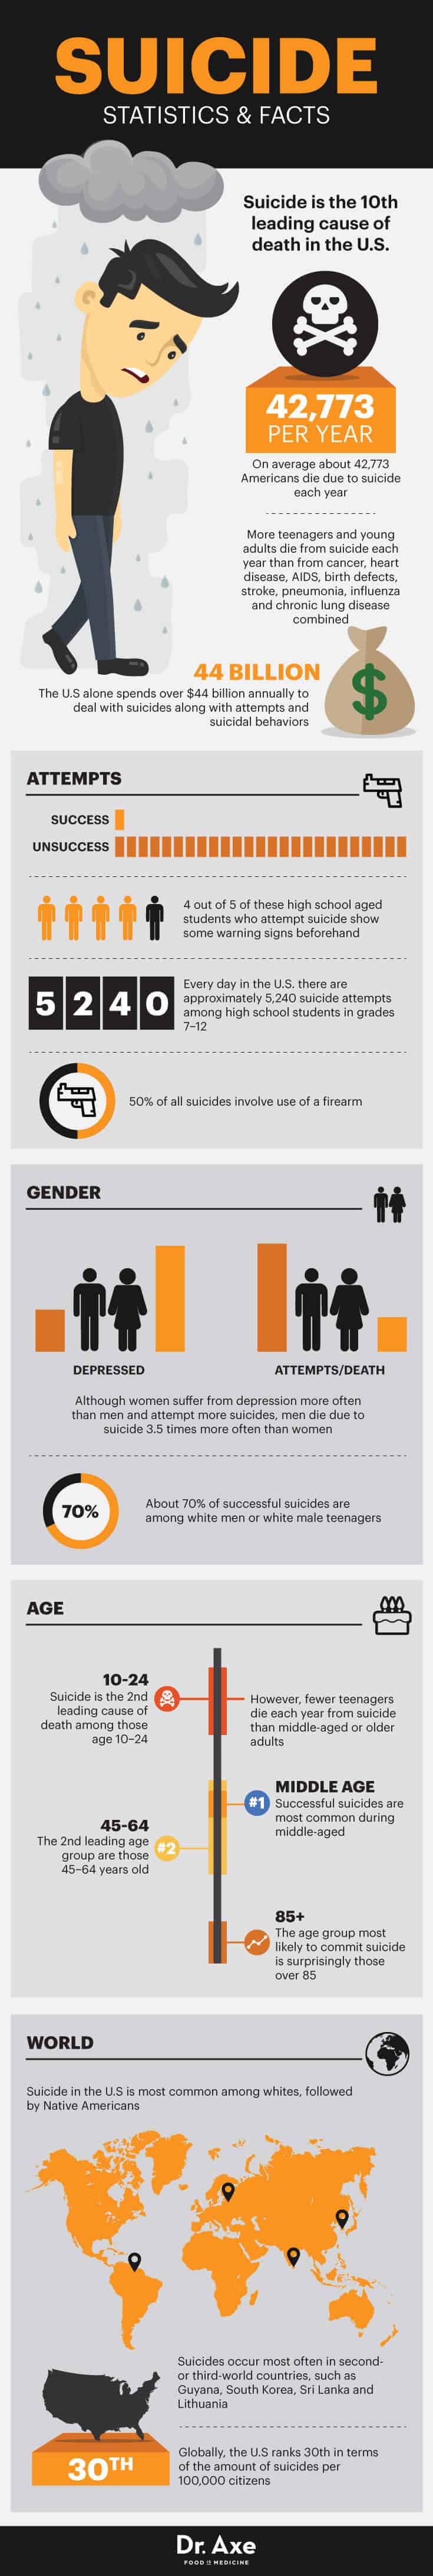 Suicide stats and facts - Dr. Axe